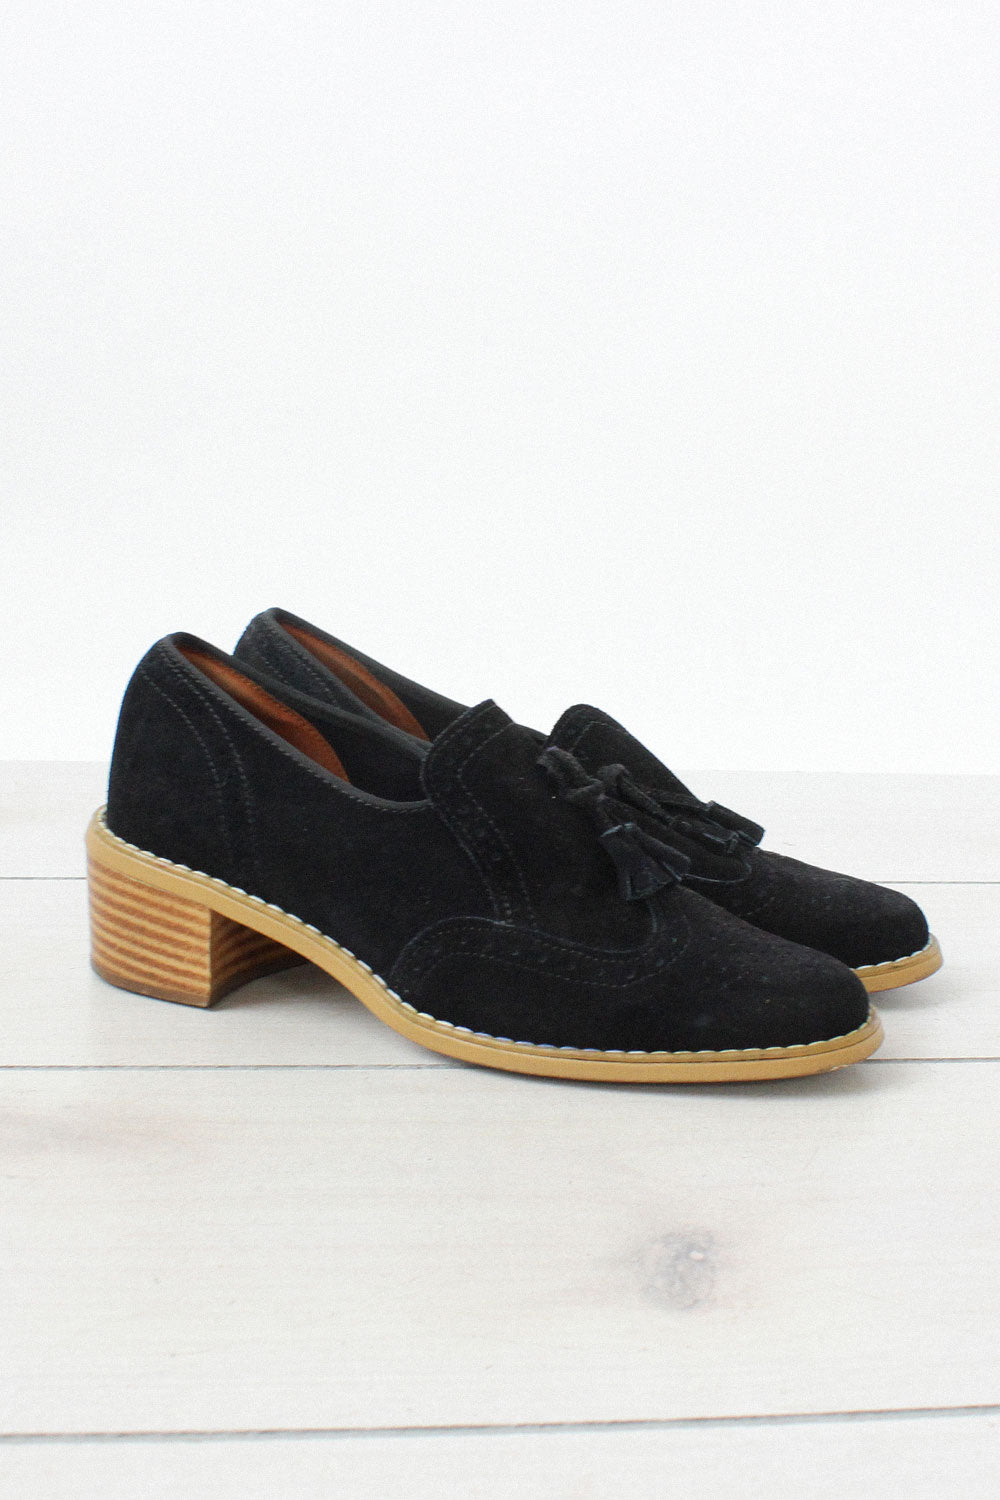 Chunky Suede Loafers 7 1/2